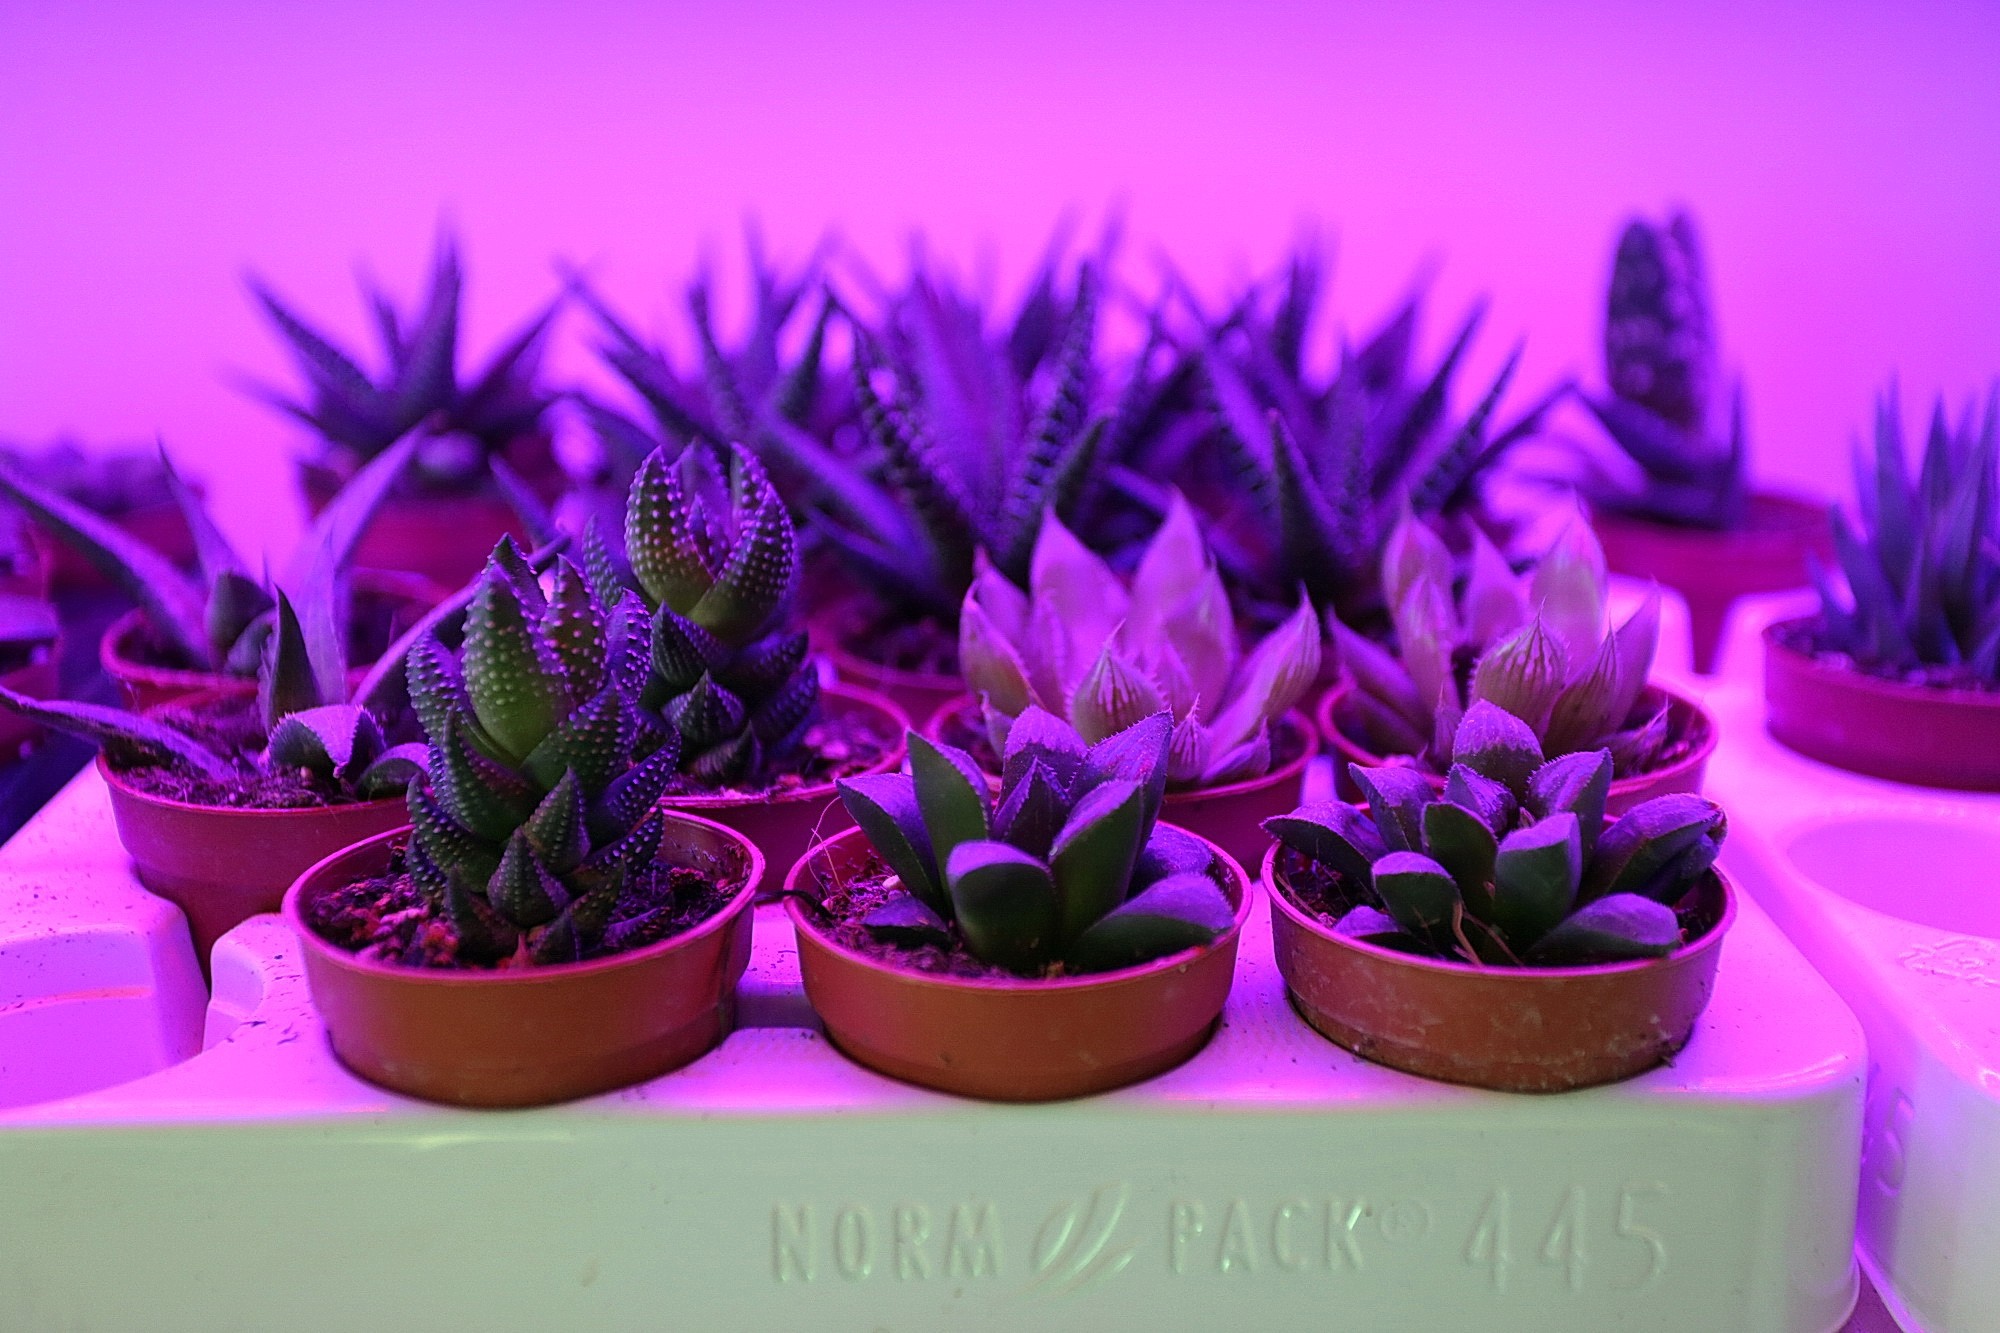 Succulents at Roslynka basking in artificial light to supplement lack of sunshine in cold months. (Photo by Anastasia Vlasova)